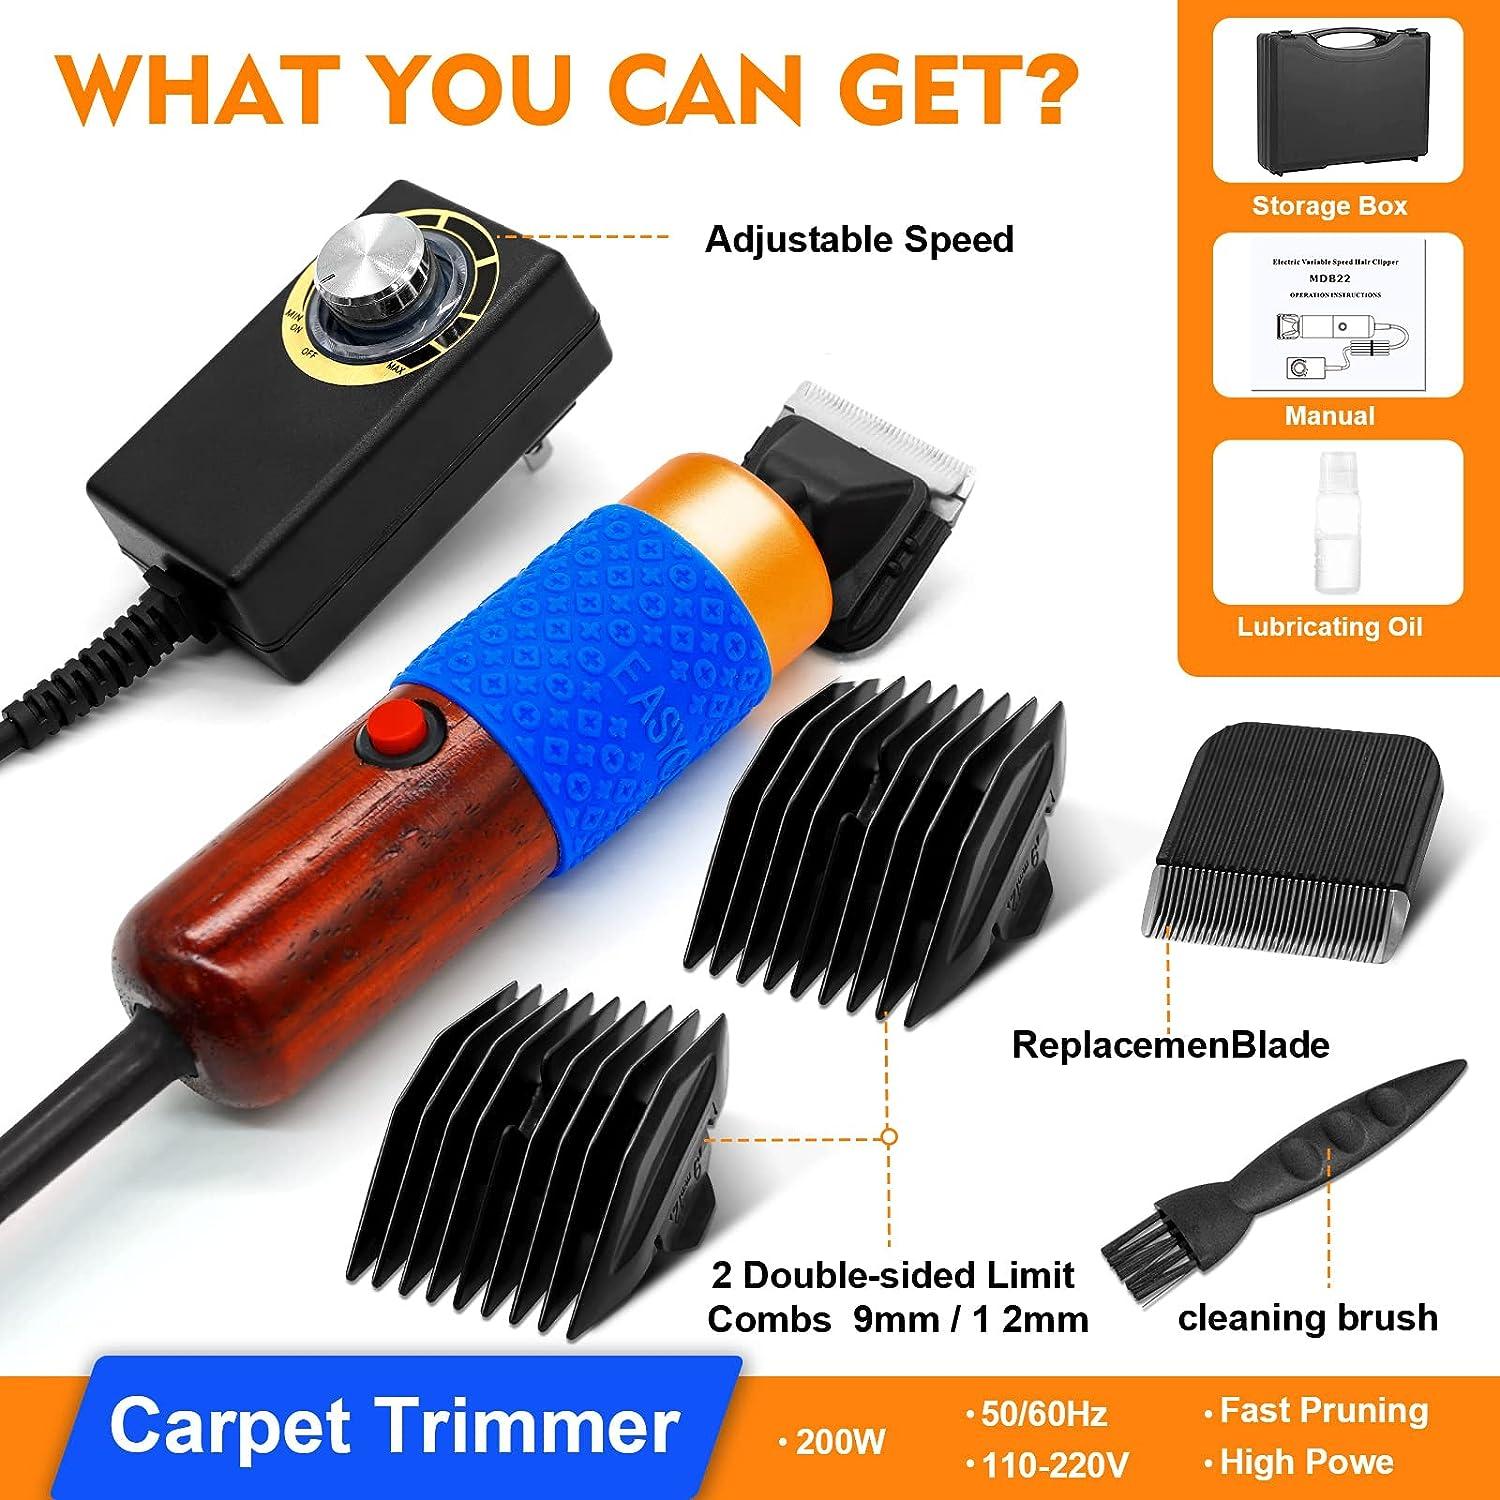 Carpet Trimmer Rug Trimmer Low Noise Rug Making Kit Supplies with  Oil,Replaceable Ceramic Blades,2 Comb Head Attachments for Handmade Rug  Clean and Tufted Carpet, Tufting Gun (1 Replaceable Blades)